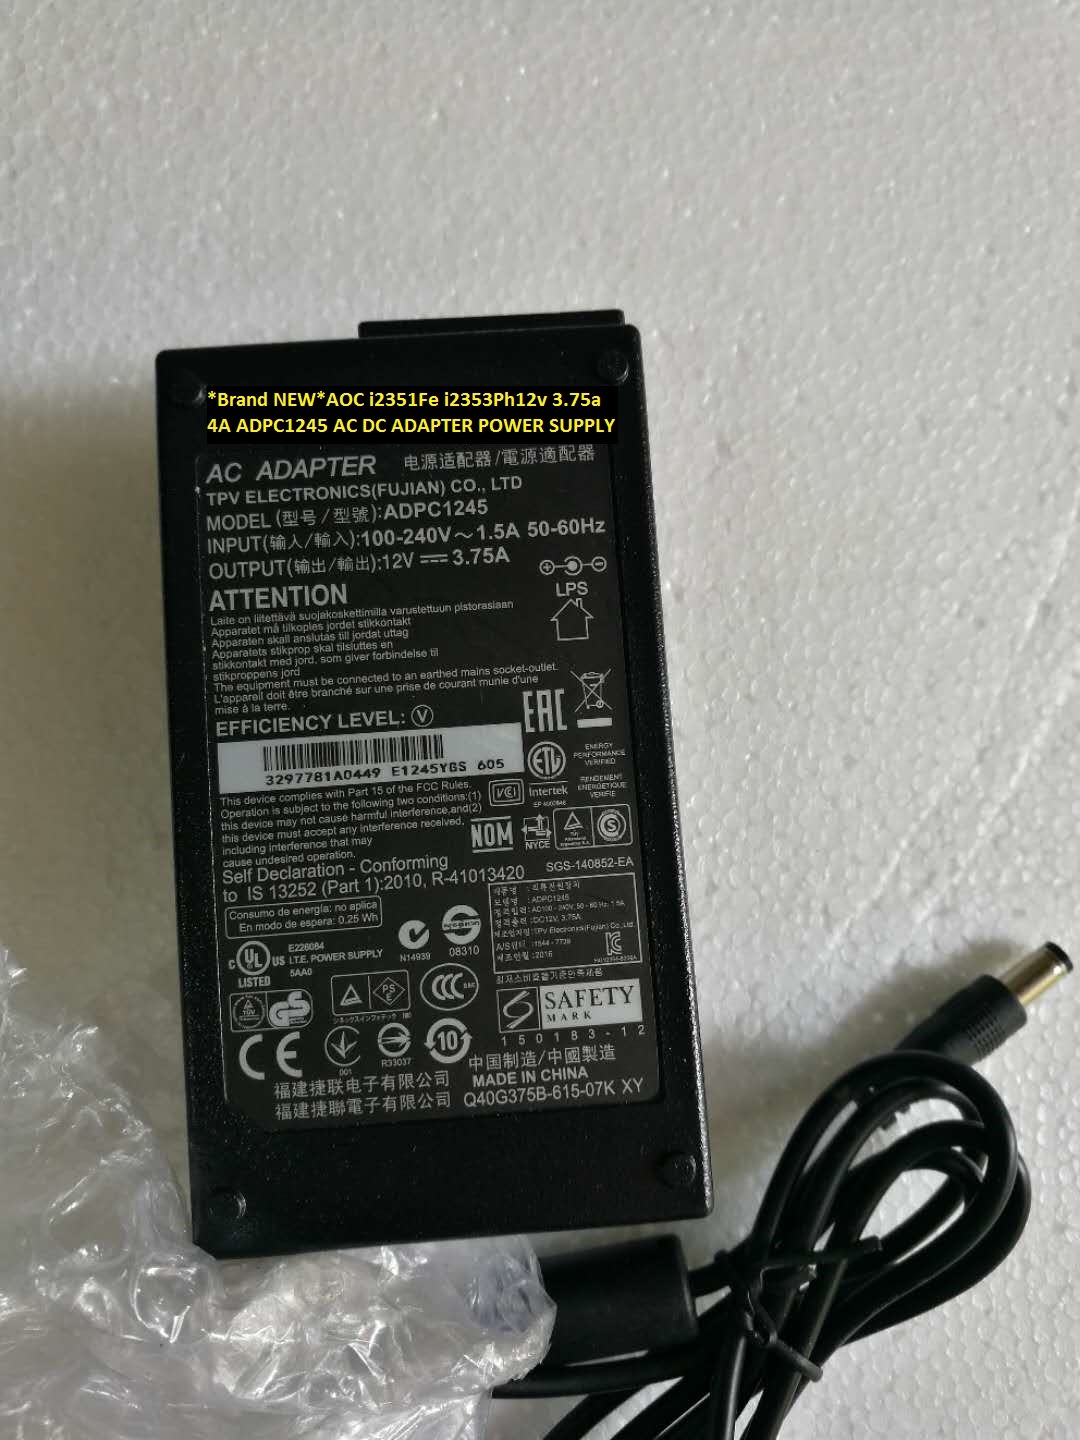 *Brand NEW*ADPC1245 AC100-240V AOC i2353Ph 12v 3.75a 4A i2351Fe AC DC ADAPTER POWER SUPPLY - Click Image to Close